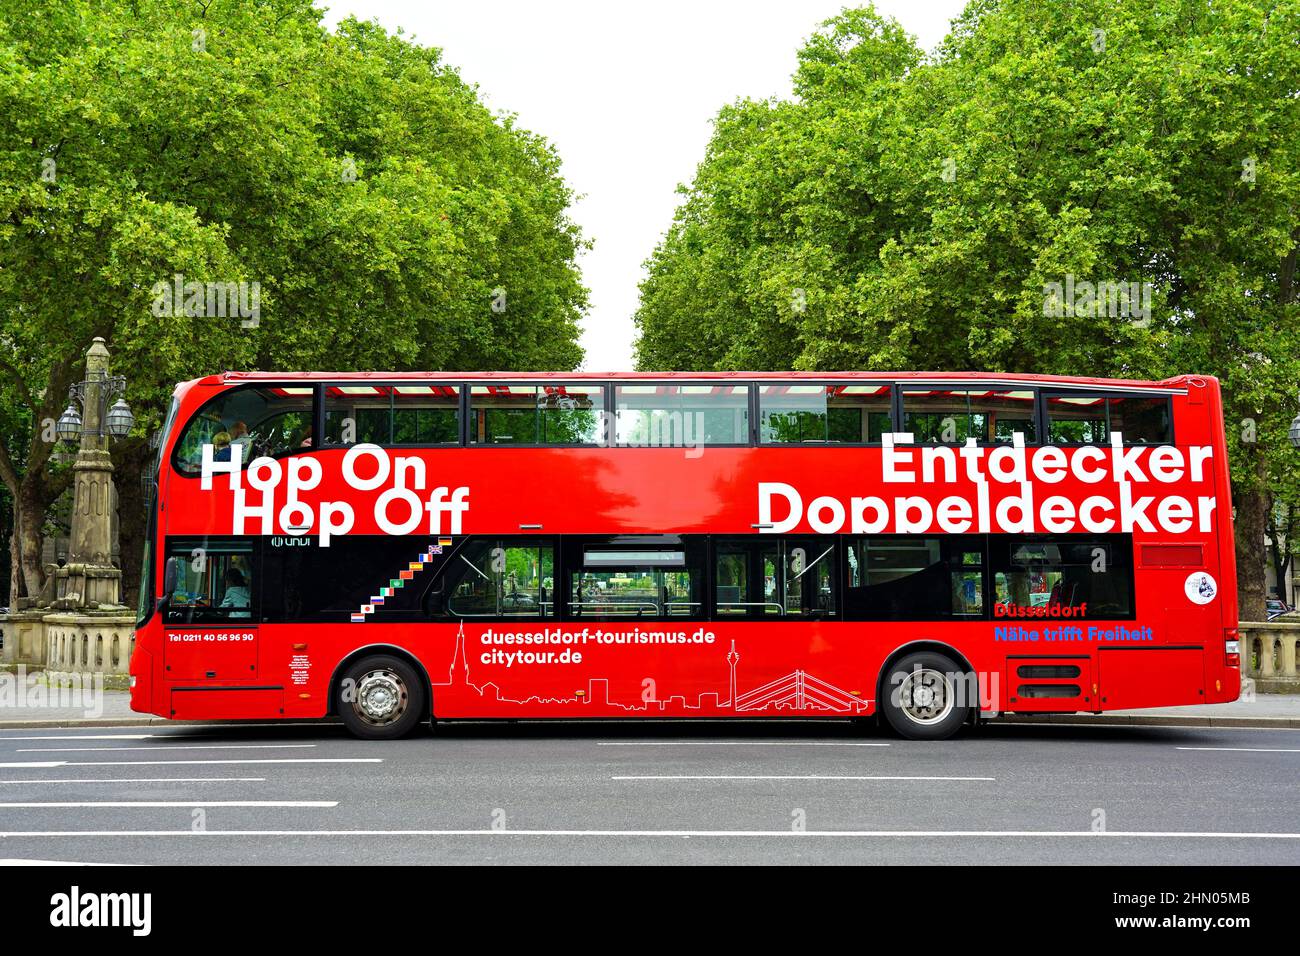 Red doubledecker city tour "Hop on / Hop off" bus waiting at a stop on Königsallee in Düsseldorf/Germany. Stock Photo